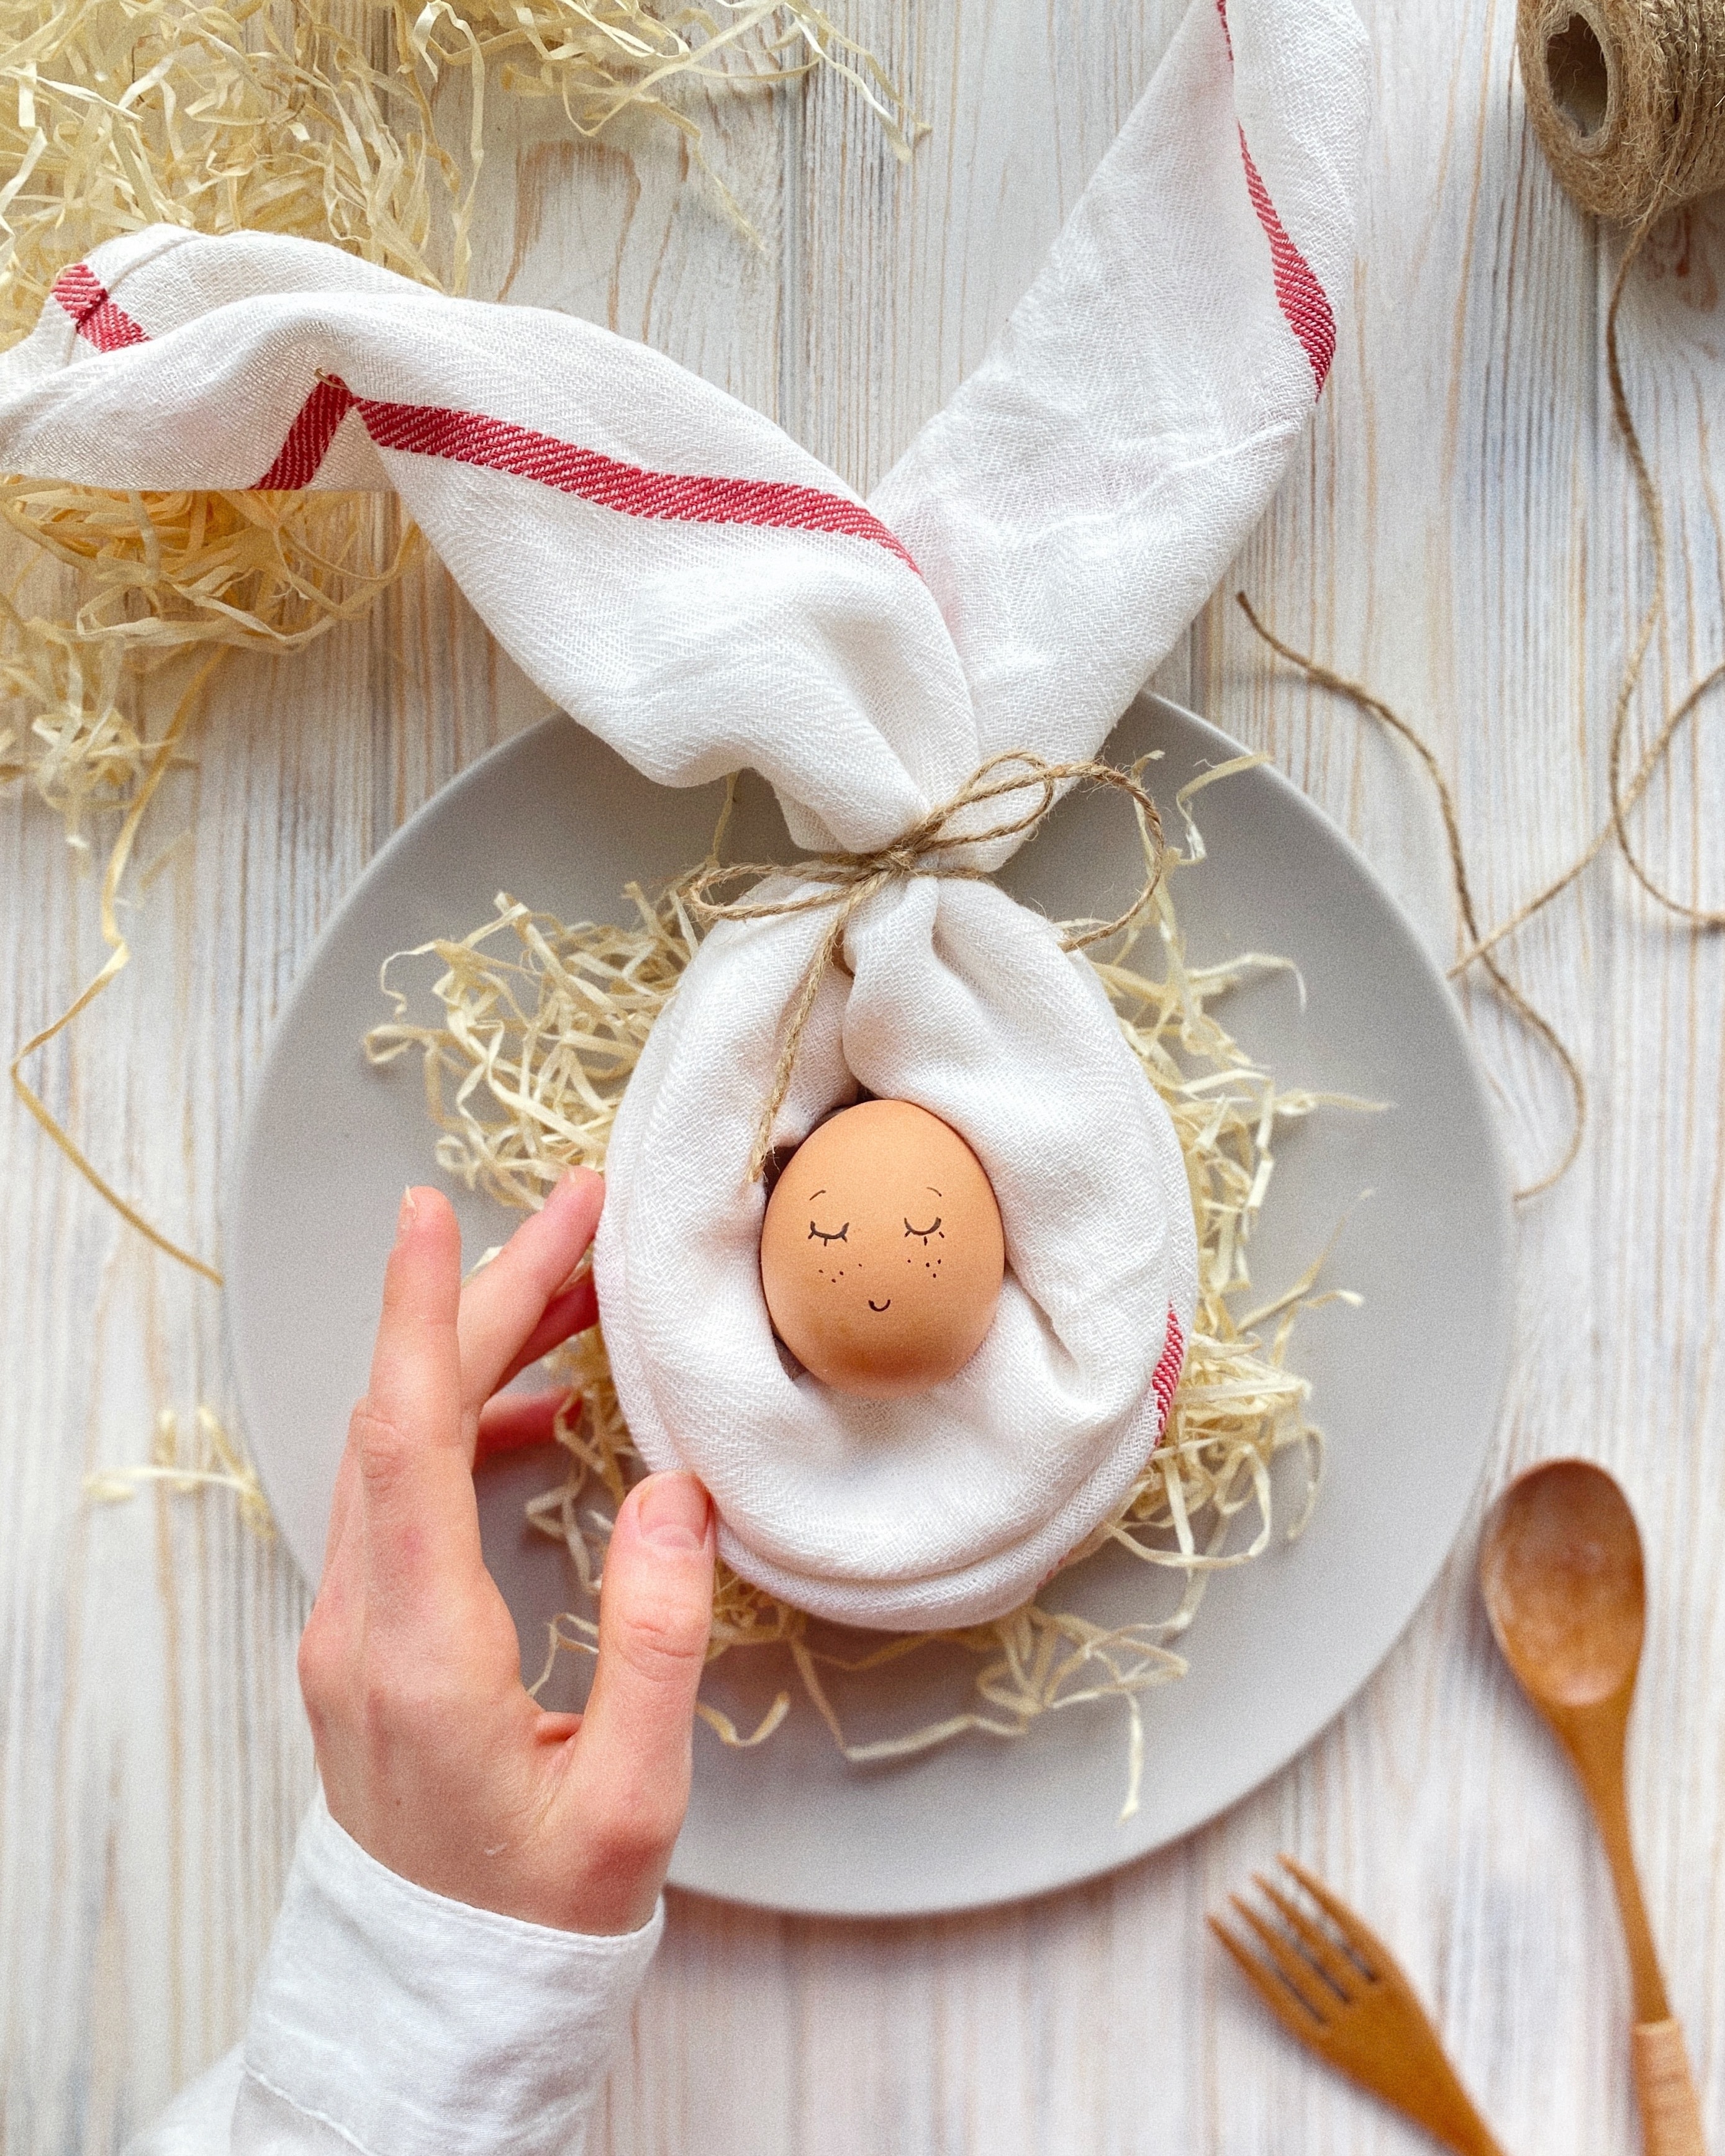 Mobile wallpaper egg, food, hand, plate, emoticon, smiley, spoons